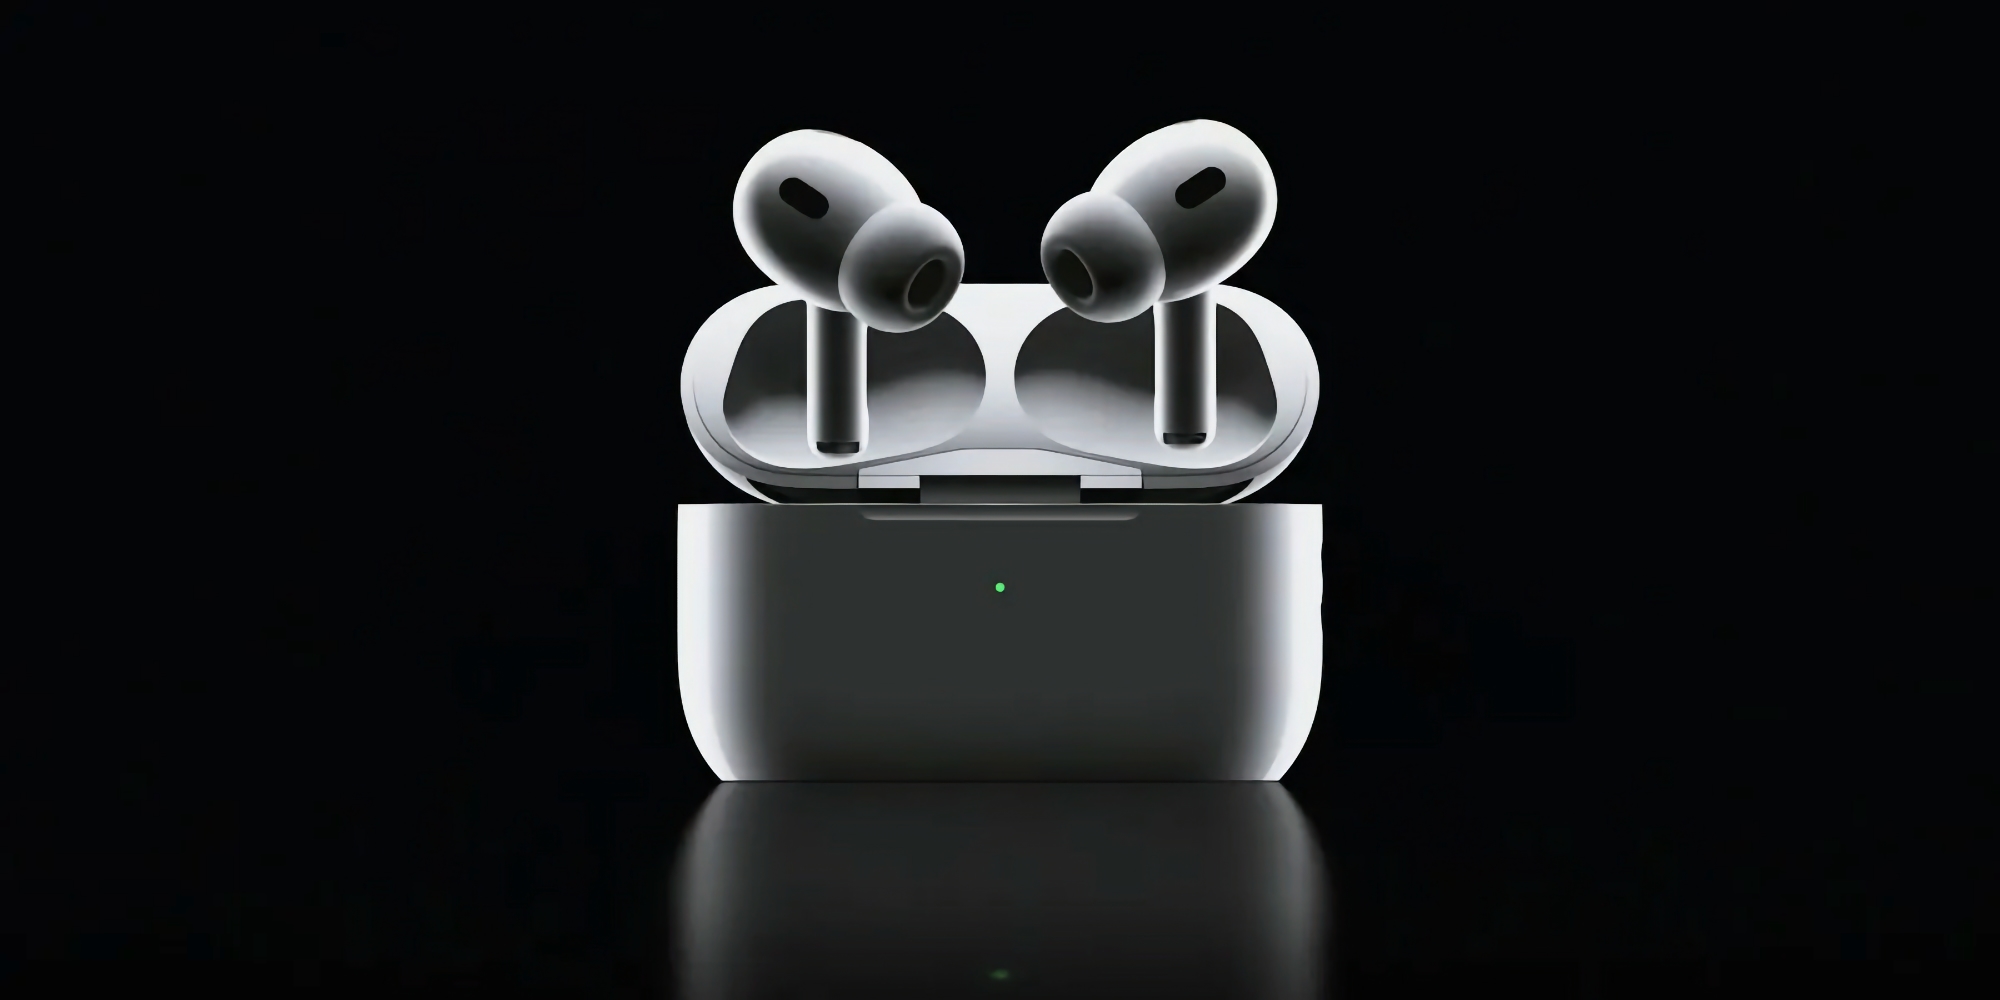 New firmware for AirPods Pro 2 has been released